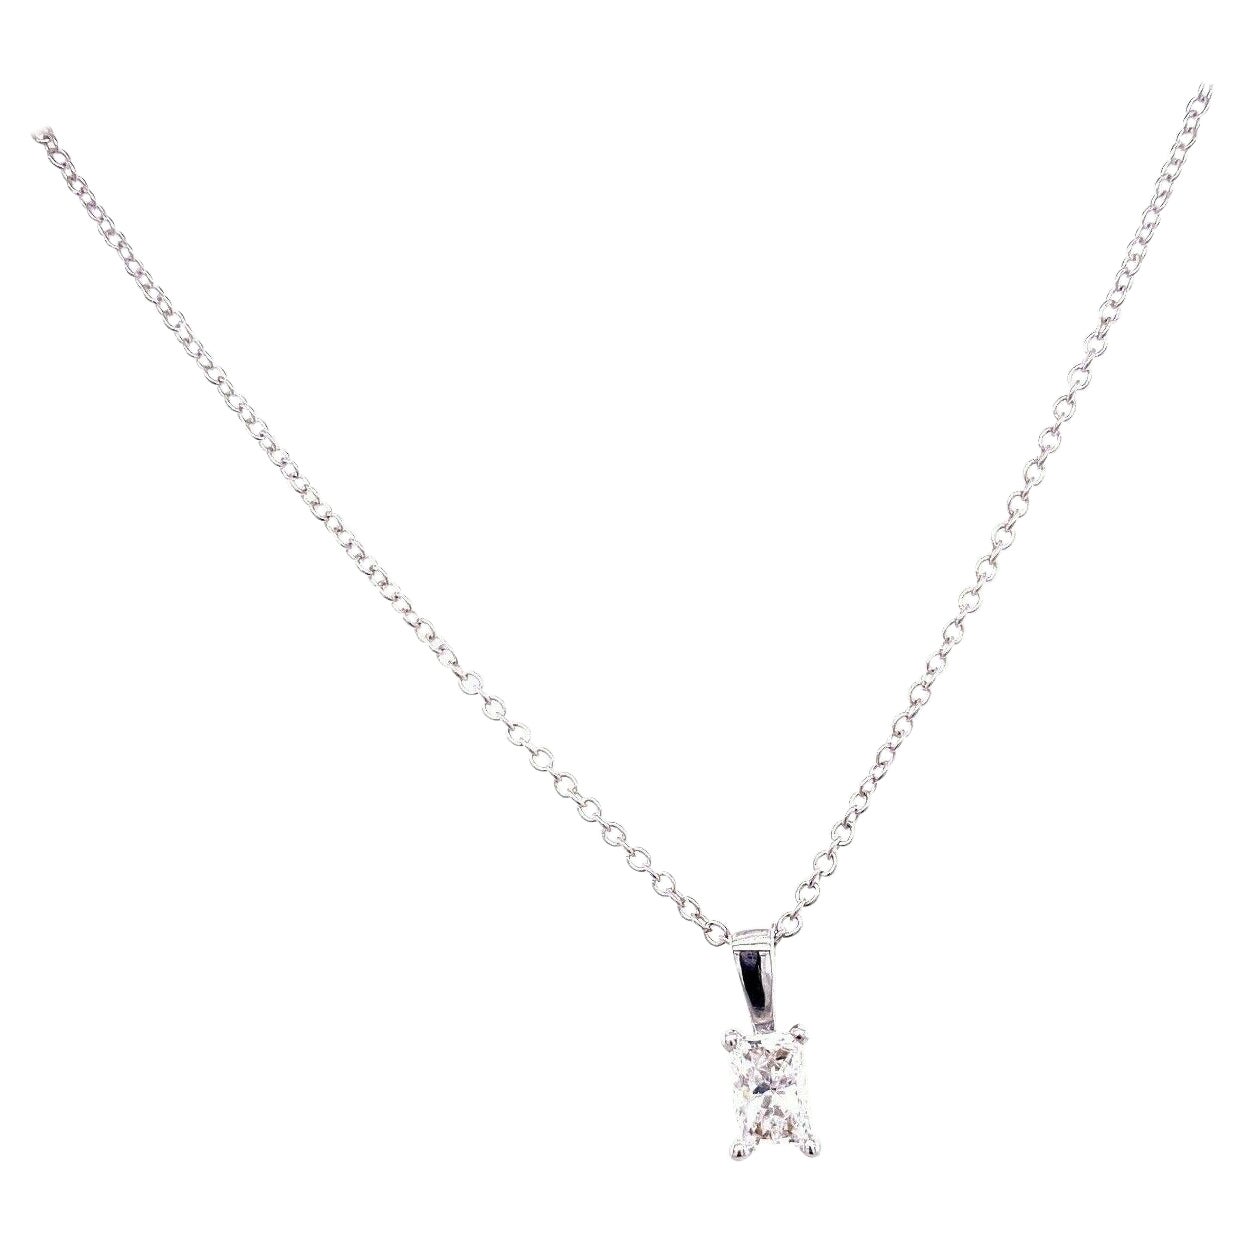 Princess Cut 0.35ct Diamond Pendant with Chain in 18ct White Gold